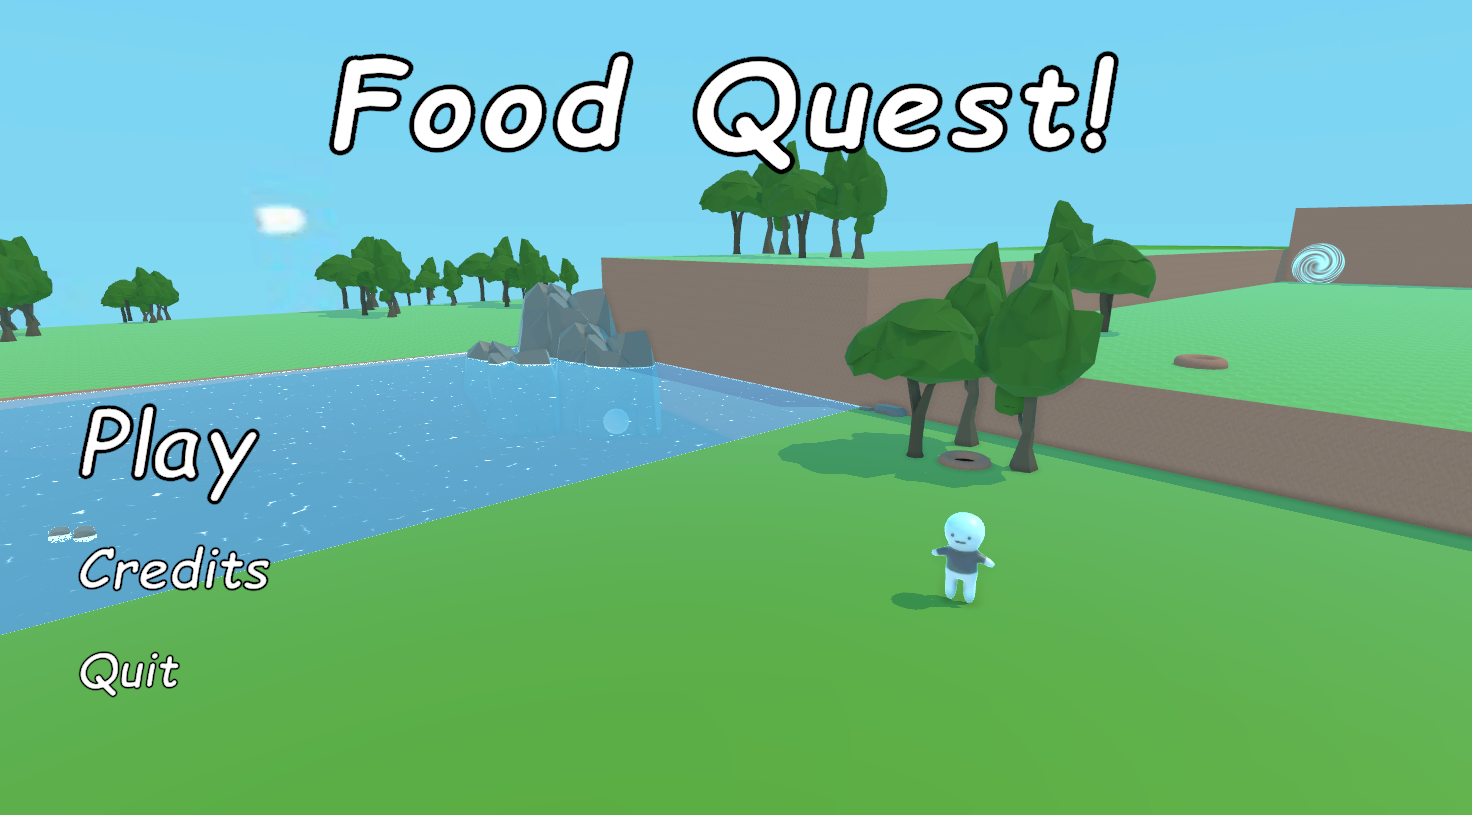 Food Quest!